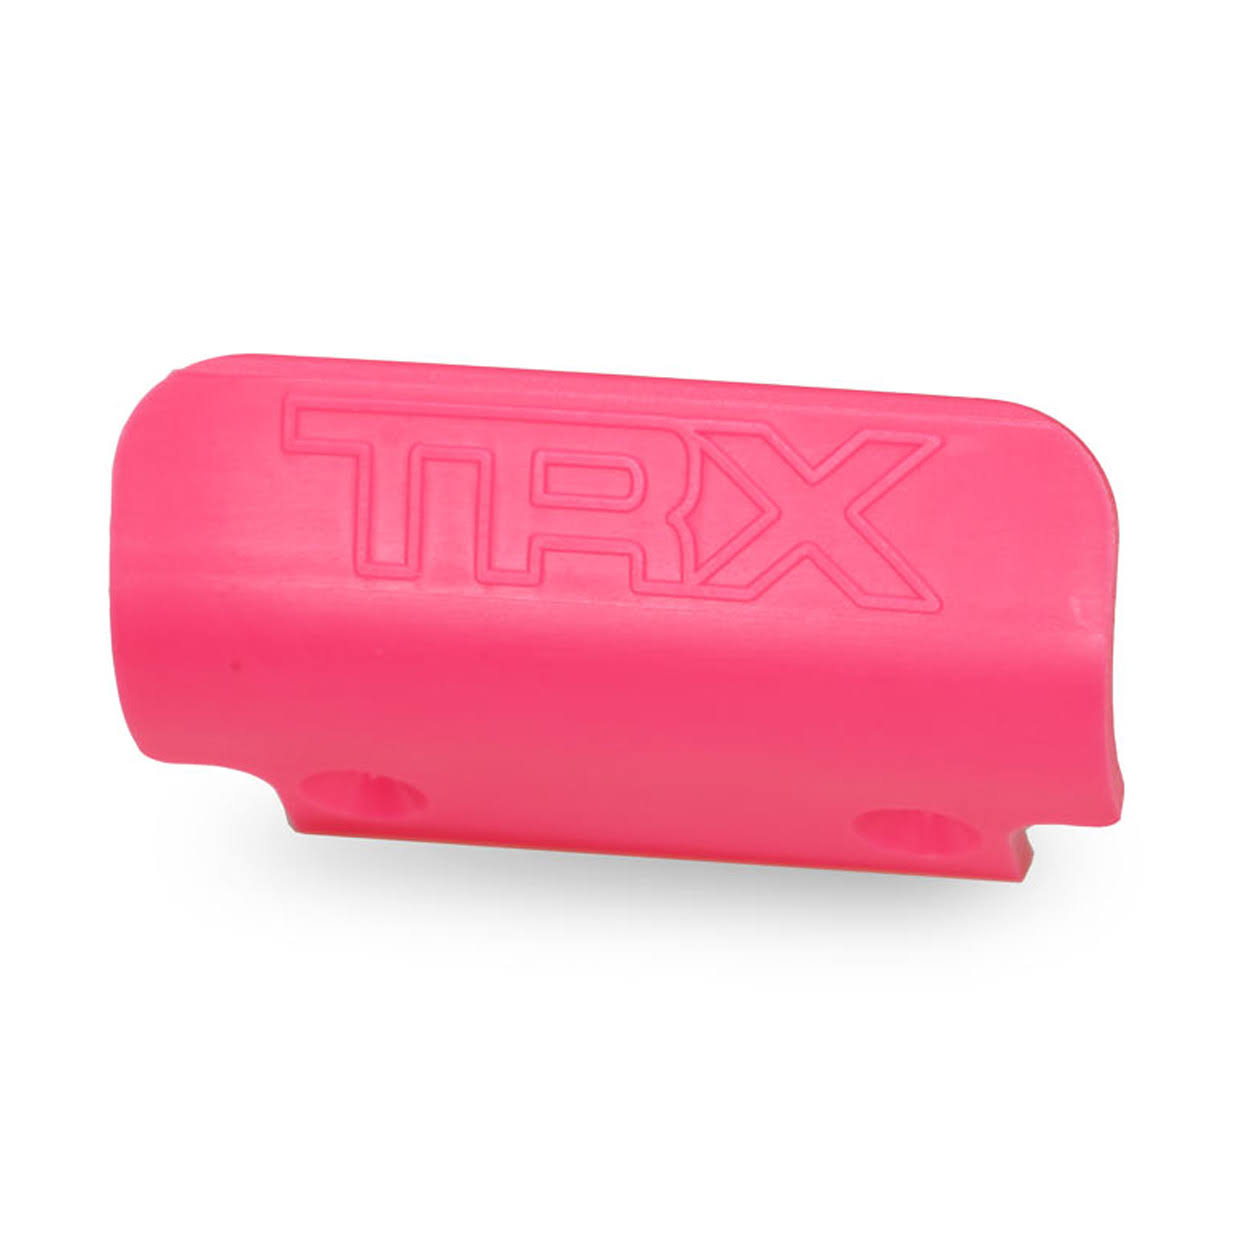 Traxxas 2735p RC Vehicle Front Bumper - Pink